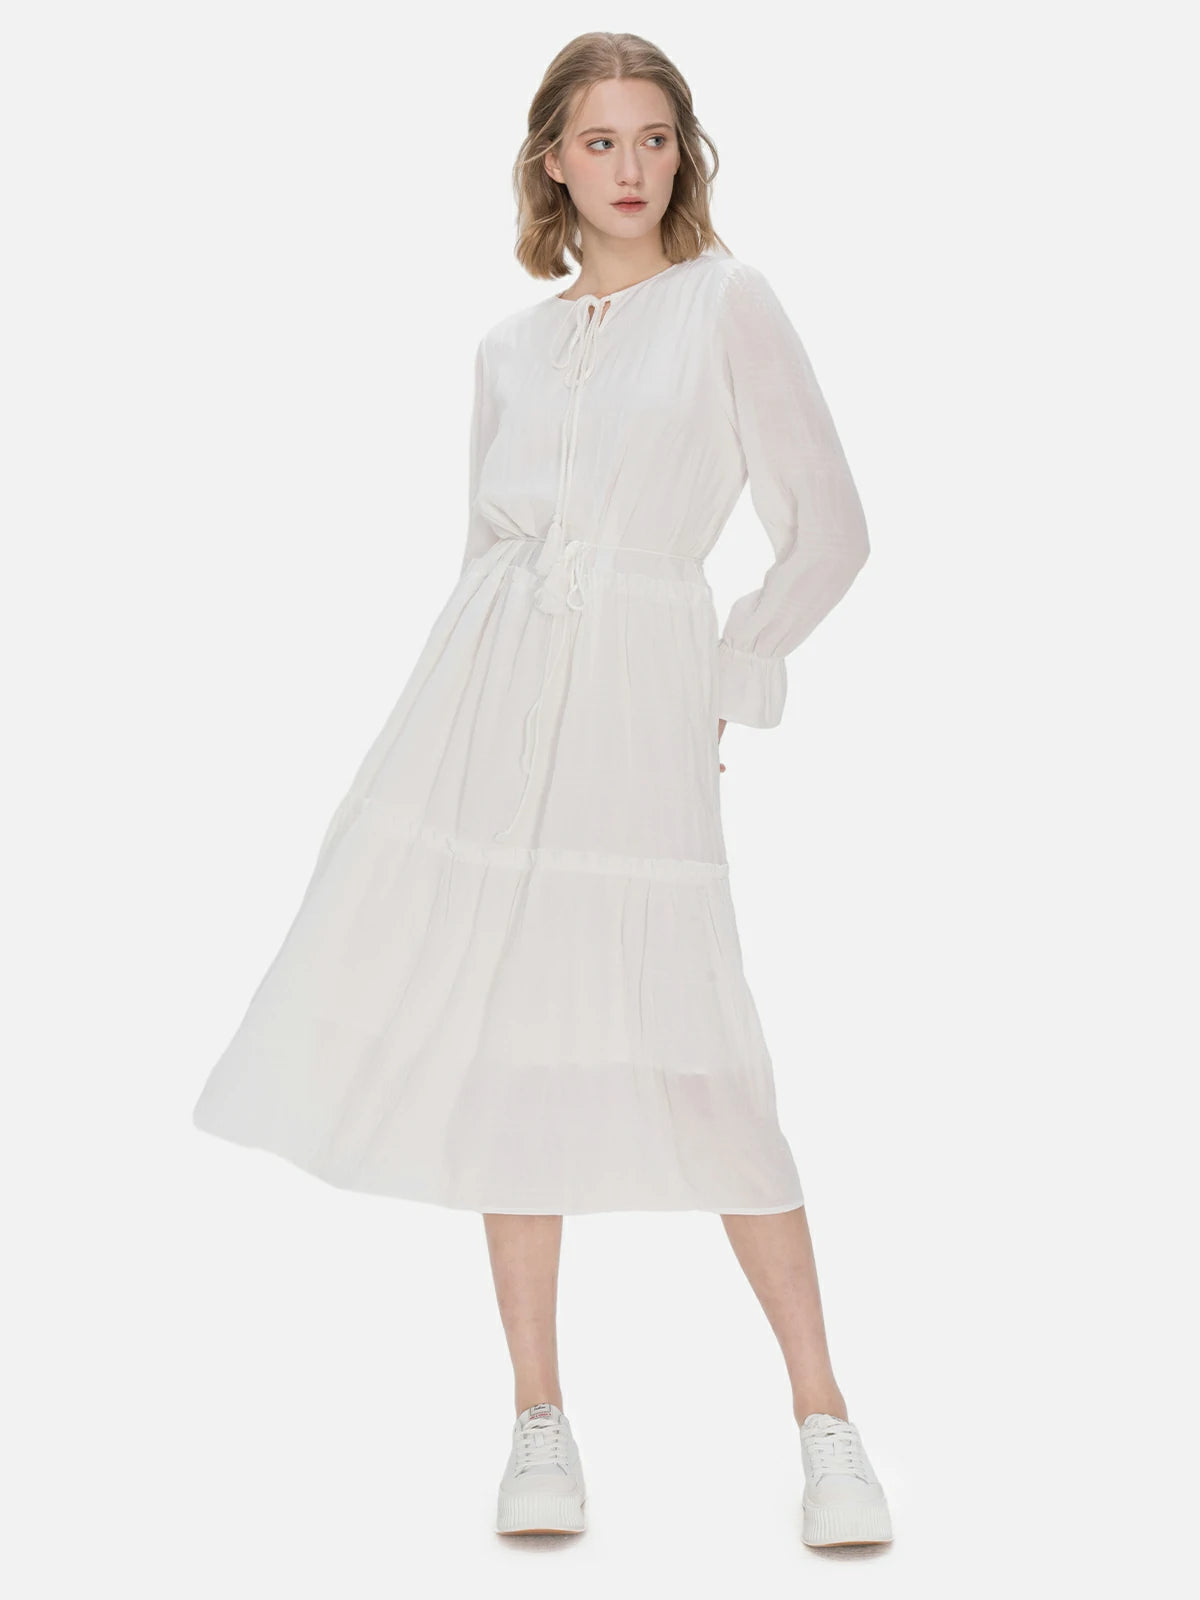 Fresh and elegant white mid-length dress adorned with neckline and waist tie details, creating a tailored fit.